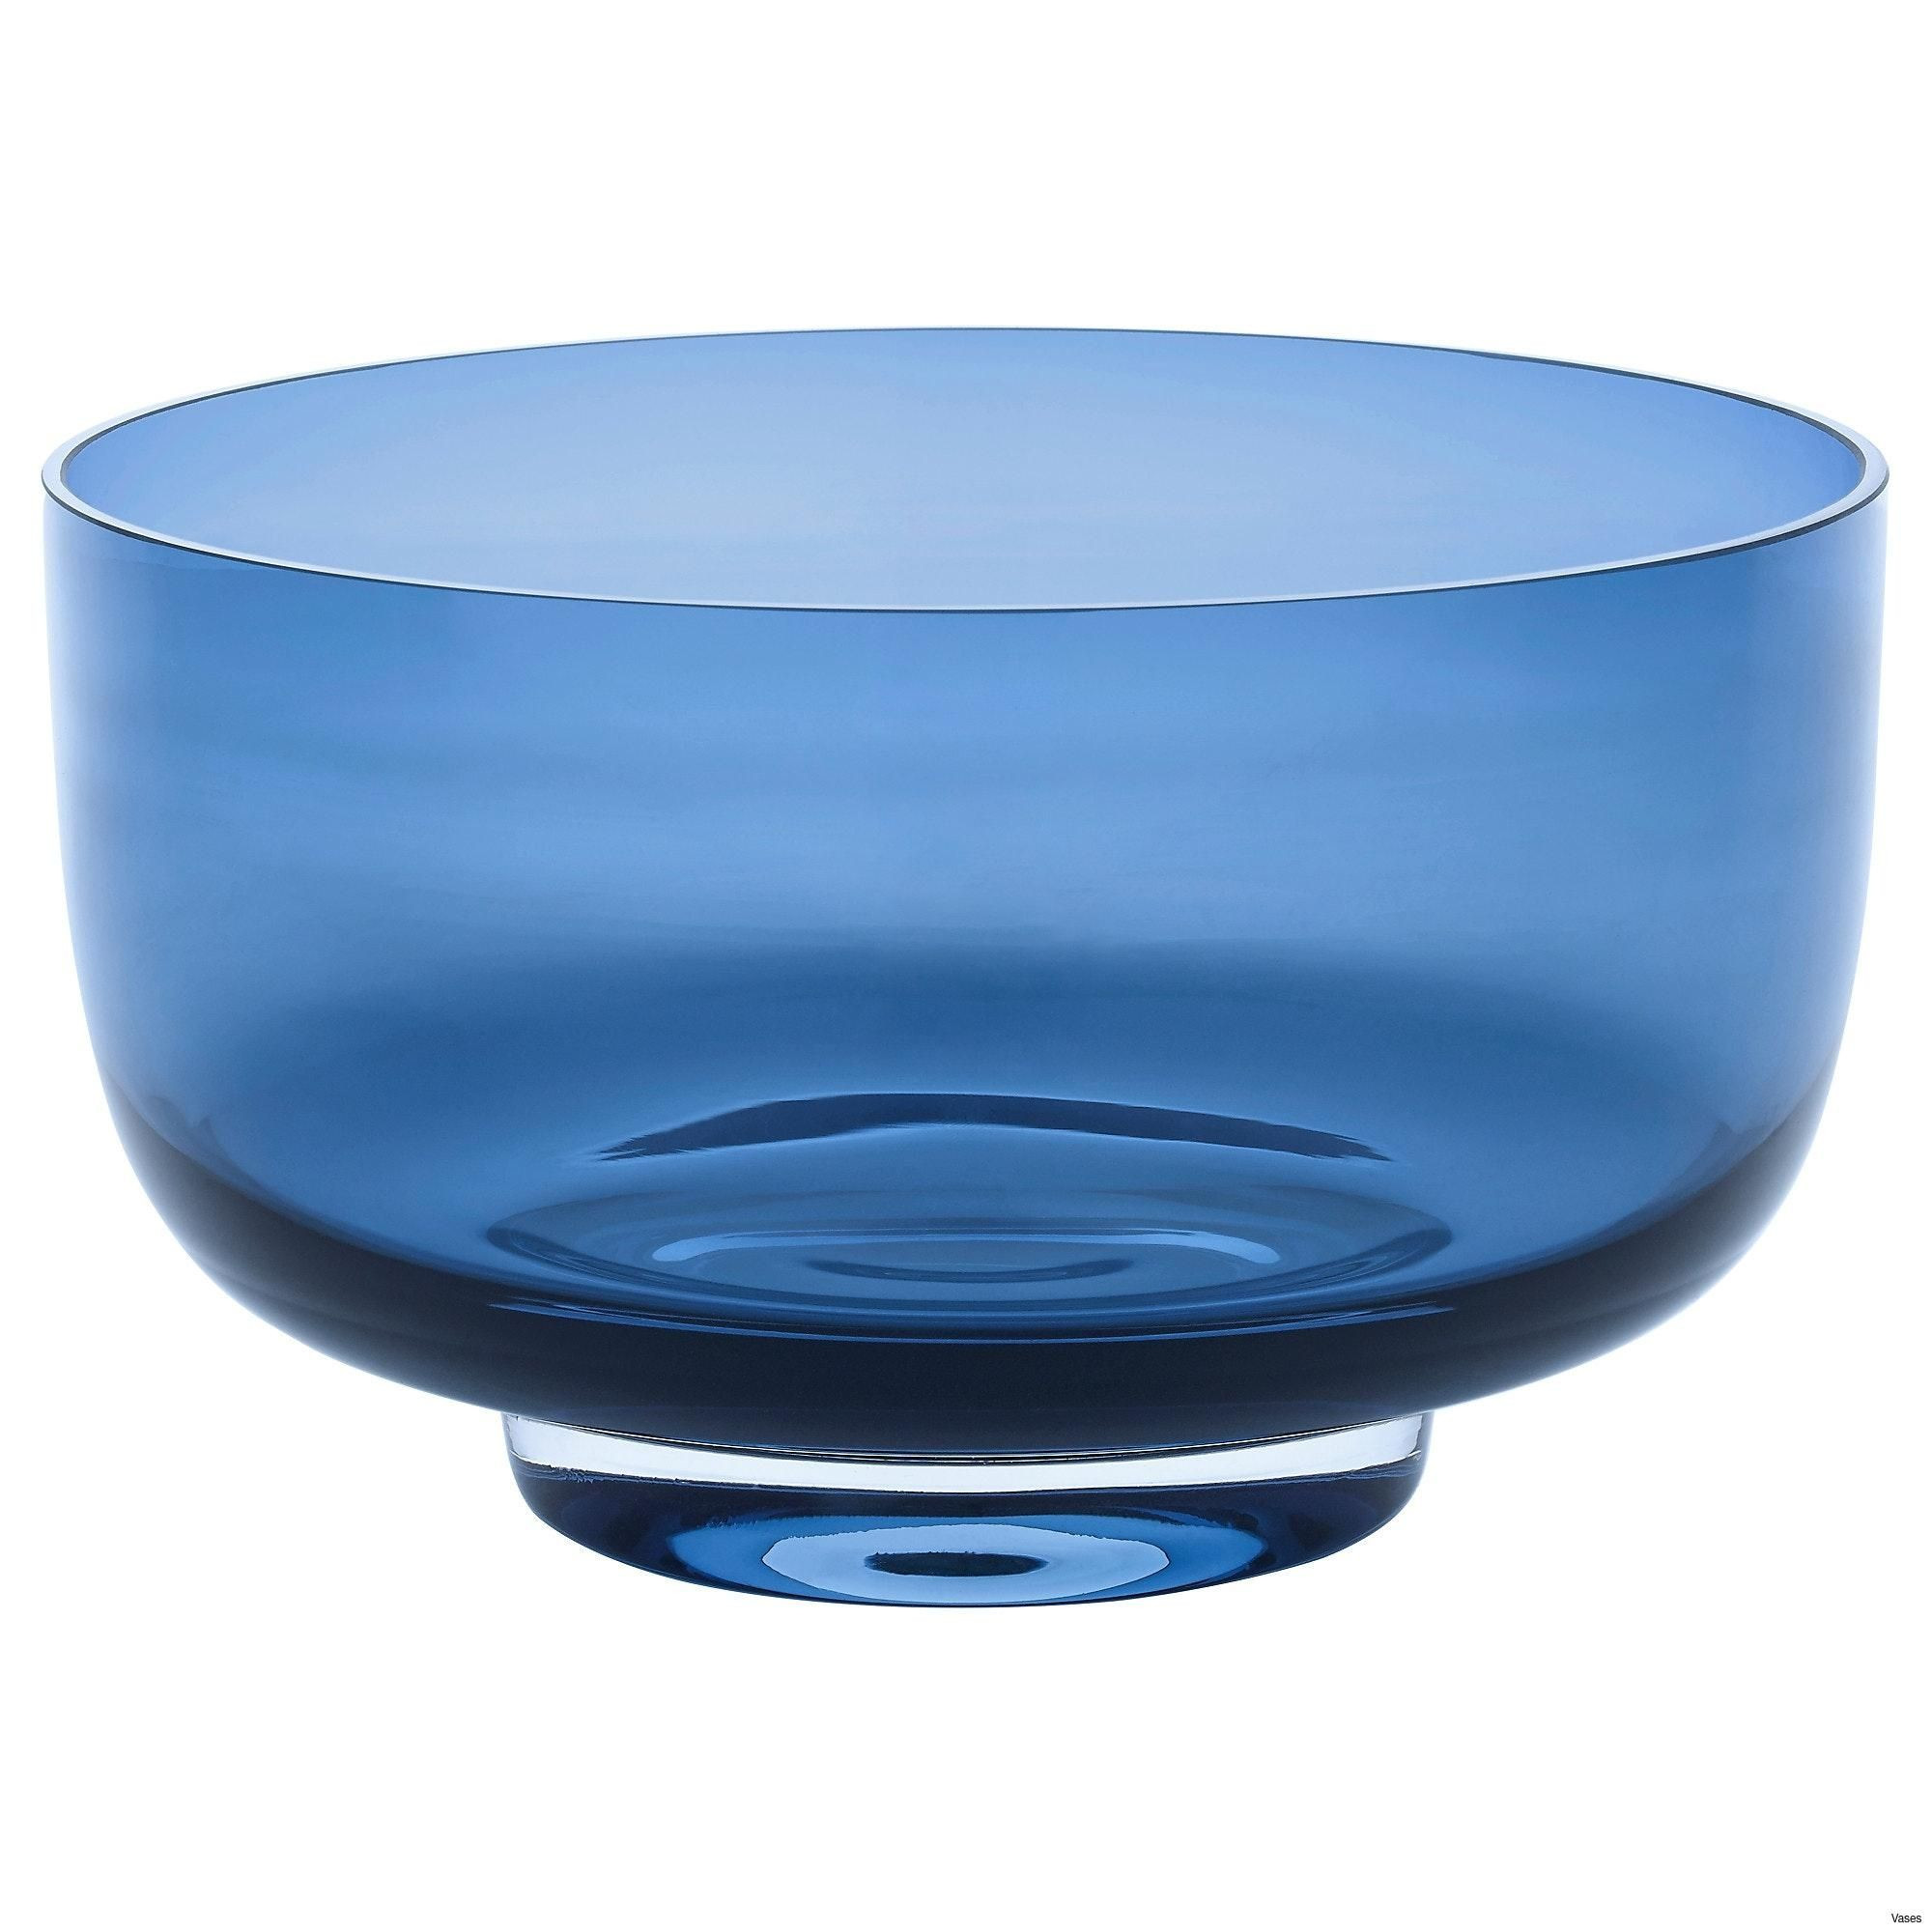 18 Spectacular Old Blue Glass Vases 2024 free download old blue glass vases of blue crystal vase unique decorative glass bowl new living room ikea in blue crystal vase unique decorative glass bowl new living room ikea vases awesome pe s5h